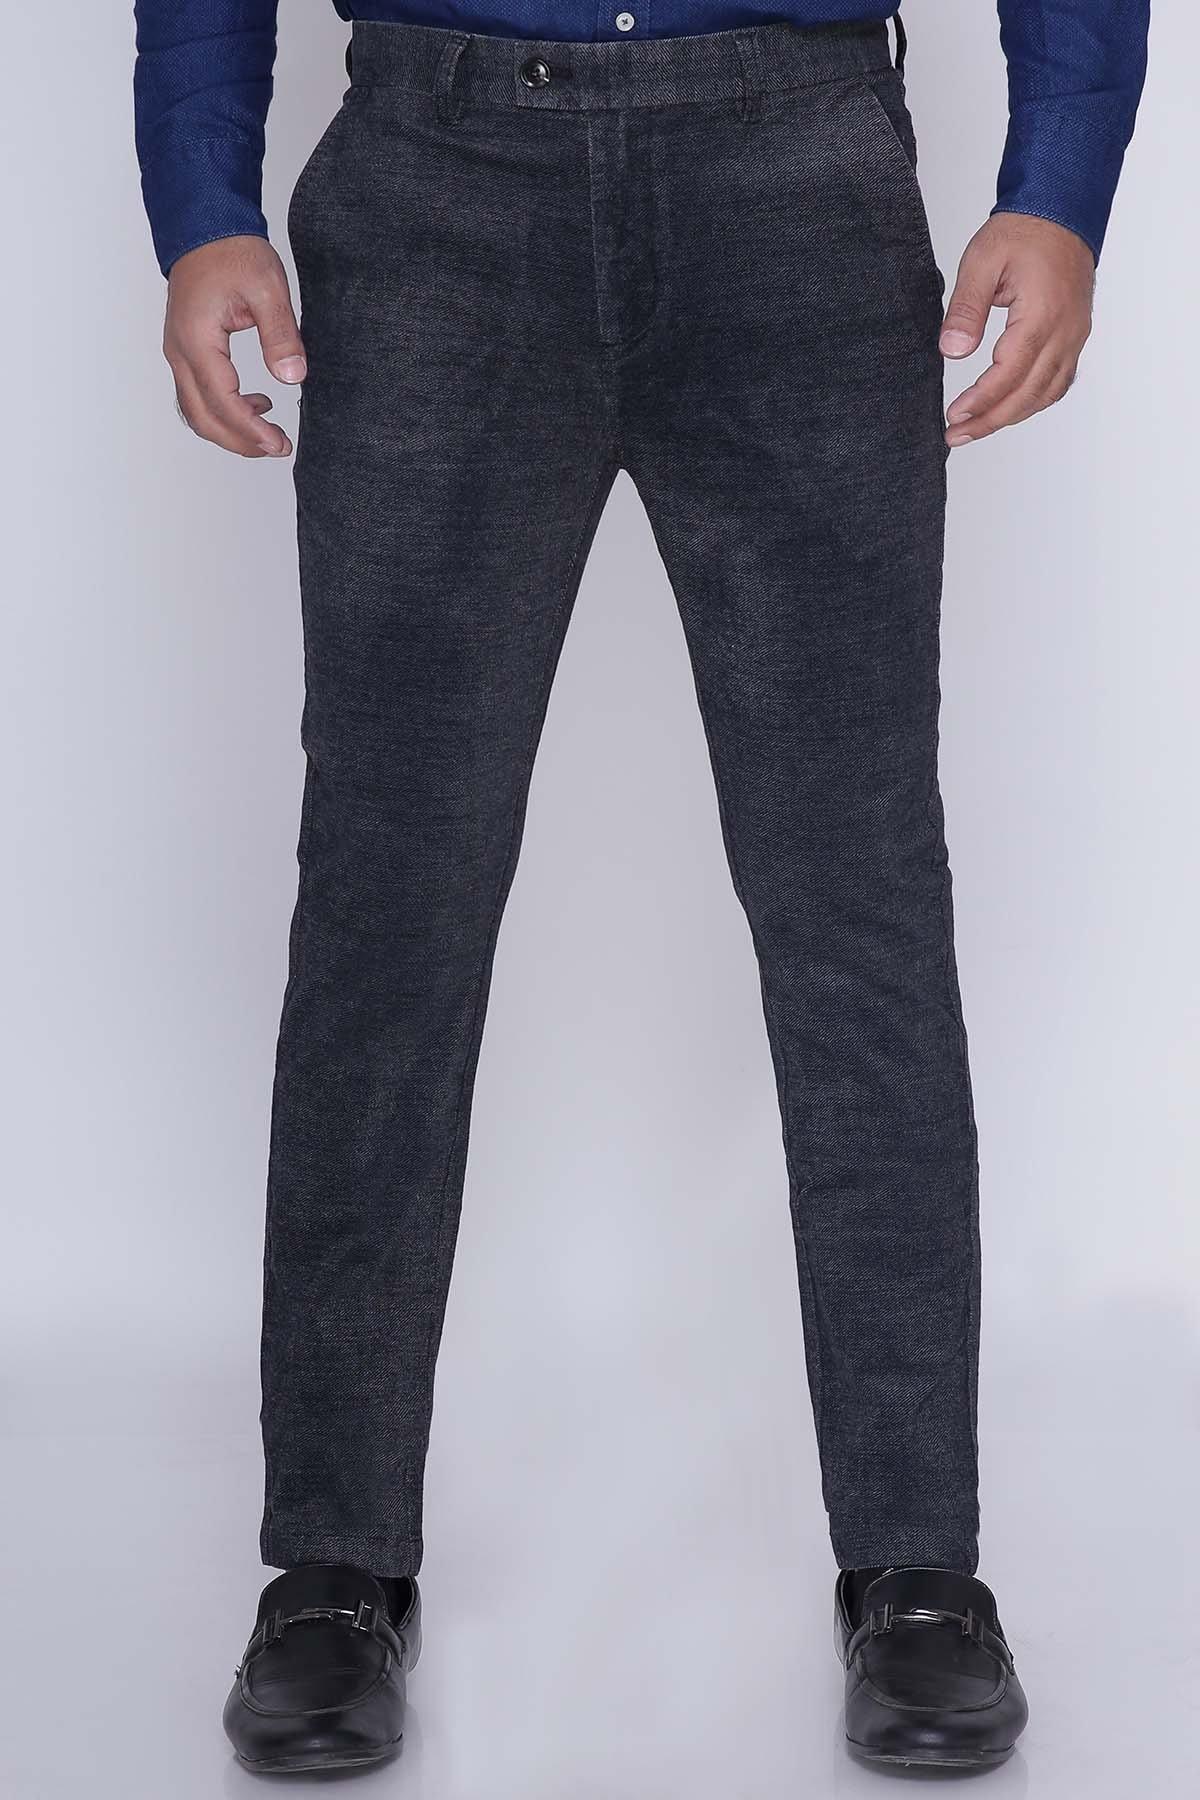 C PANT CROSS POCKET SMART FIT CHARCOAL at Charcoal Clothing